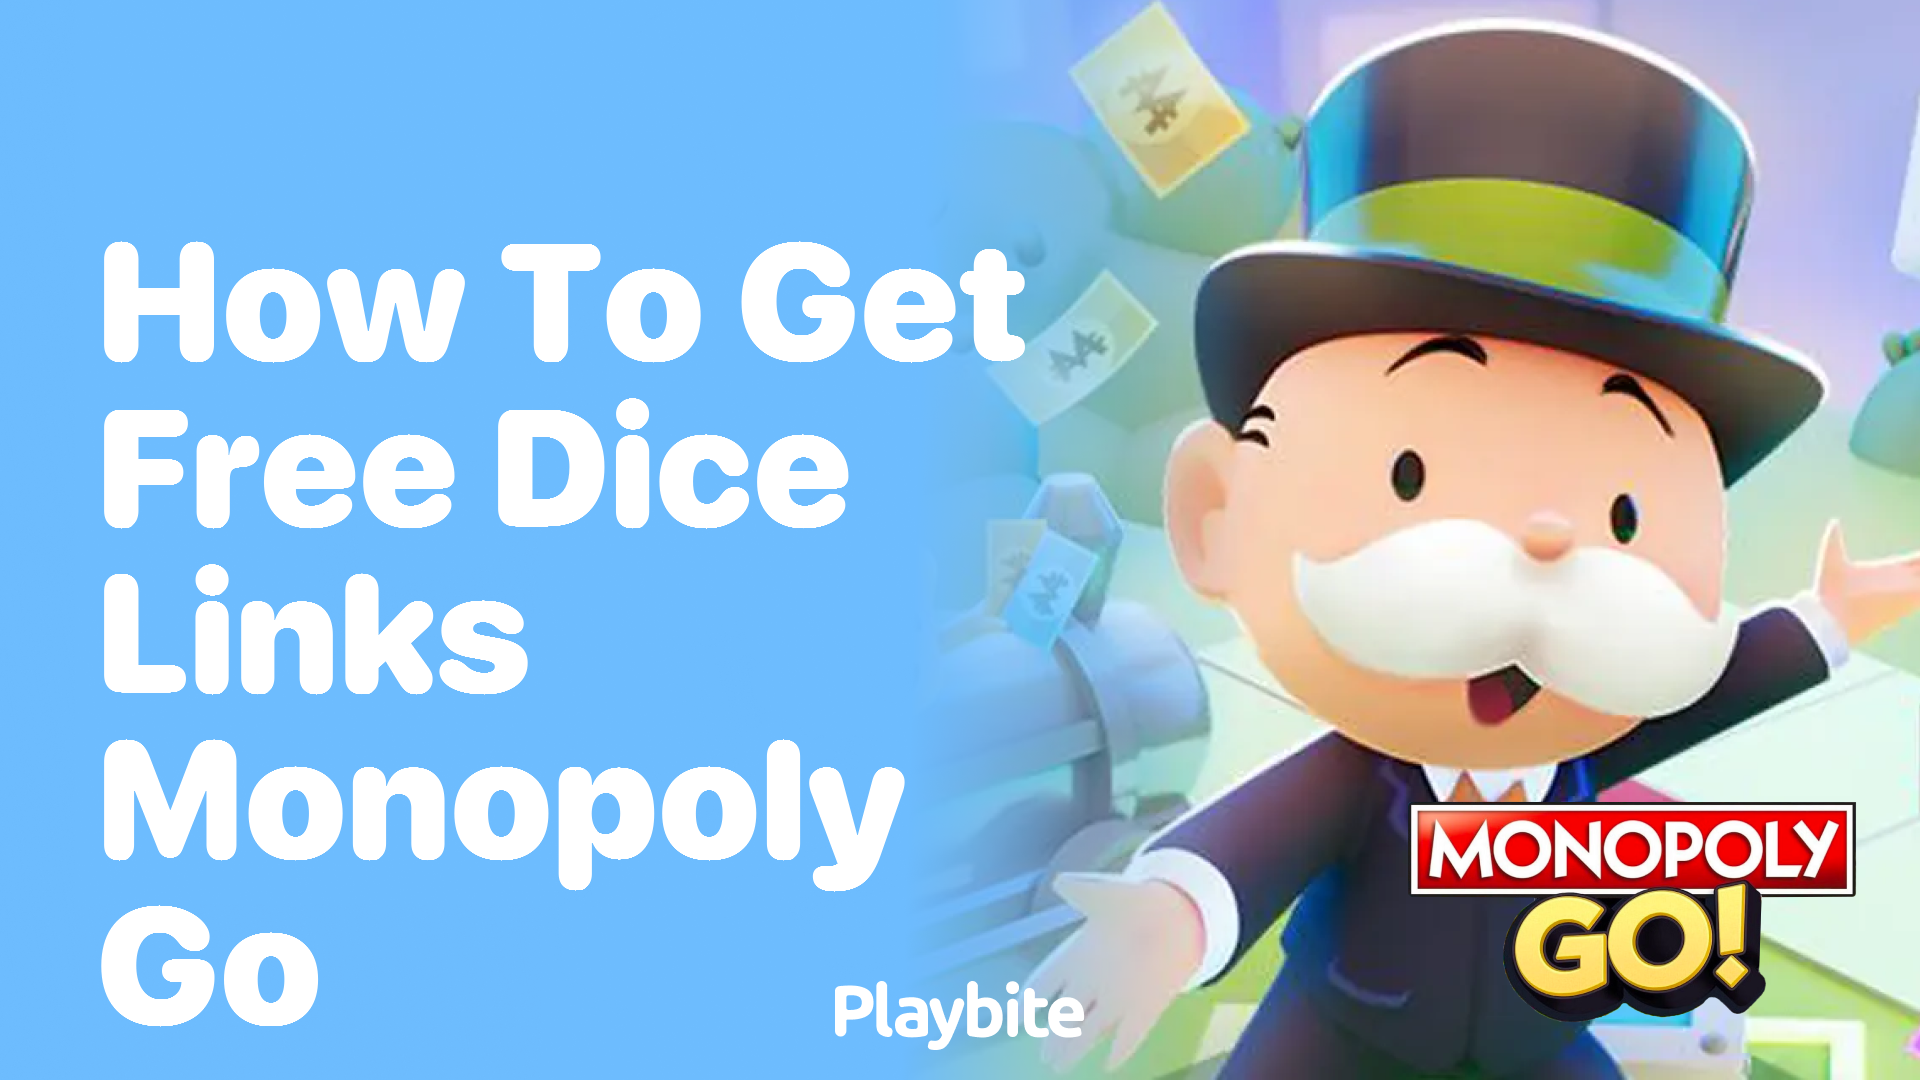 How to Get Free Dice Links in Monopoly Go